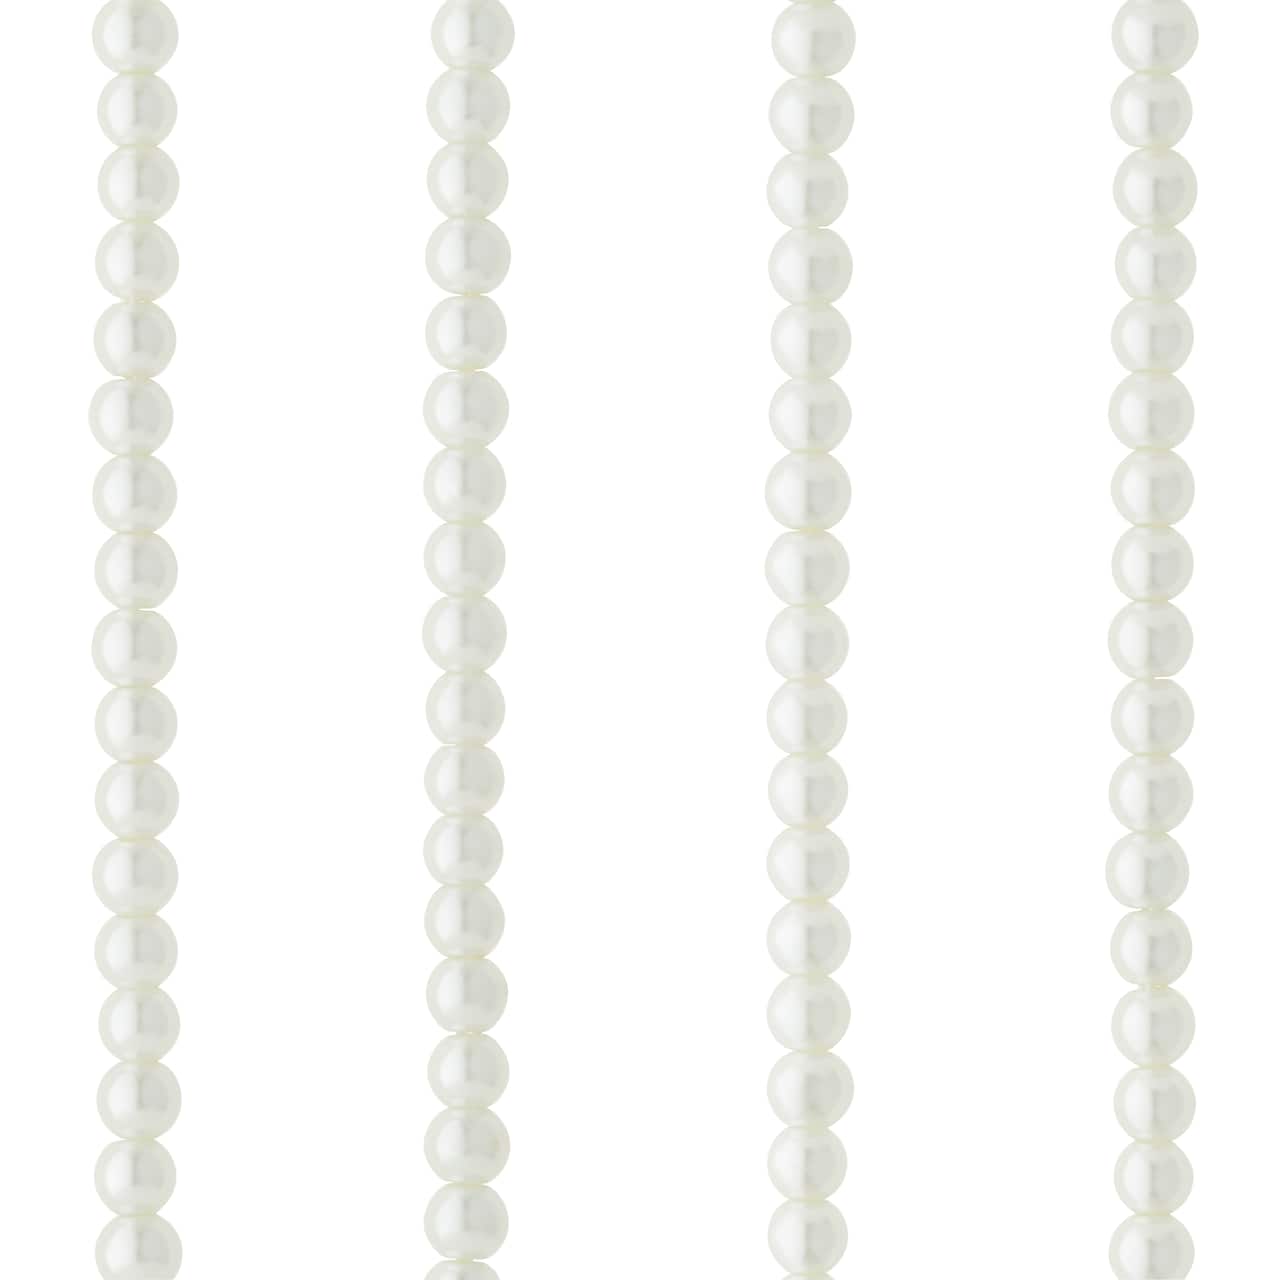 12 Packs: 160 ct. (1920 total) White Pearl Glass Beads, 6mm by Bead Landing&#x2122;